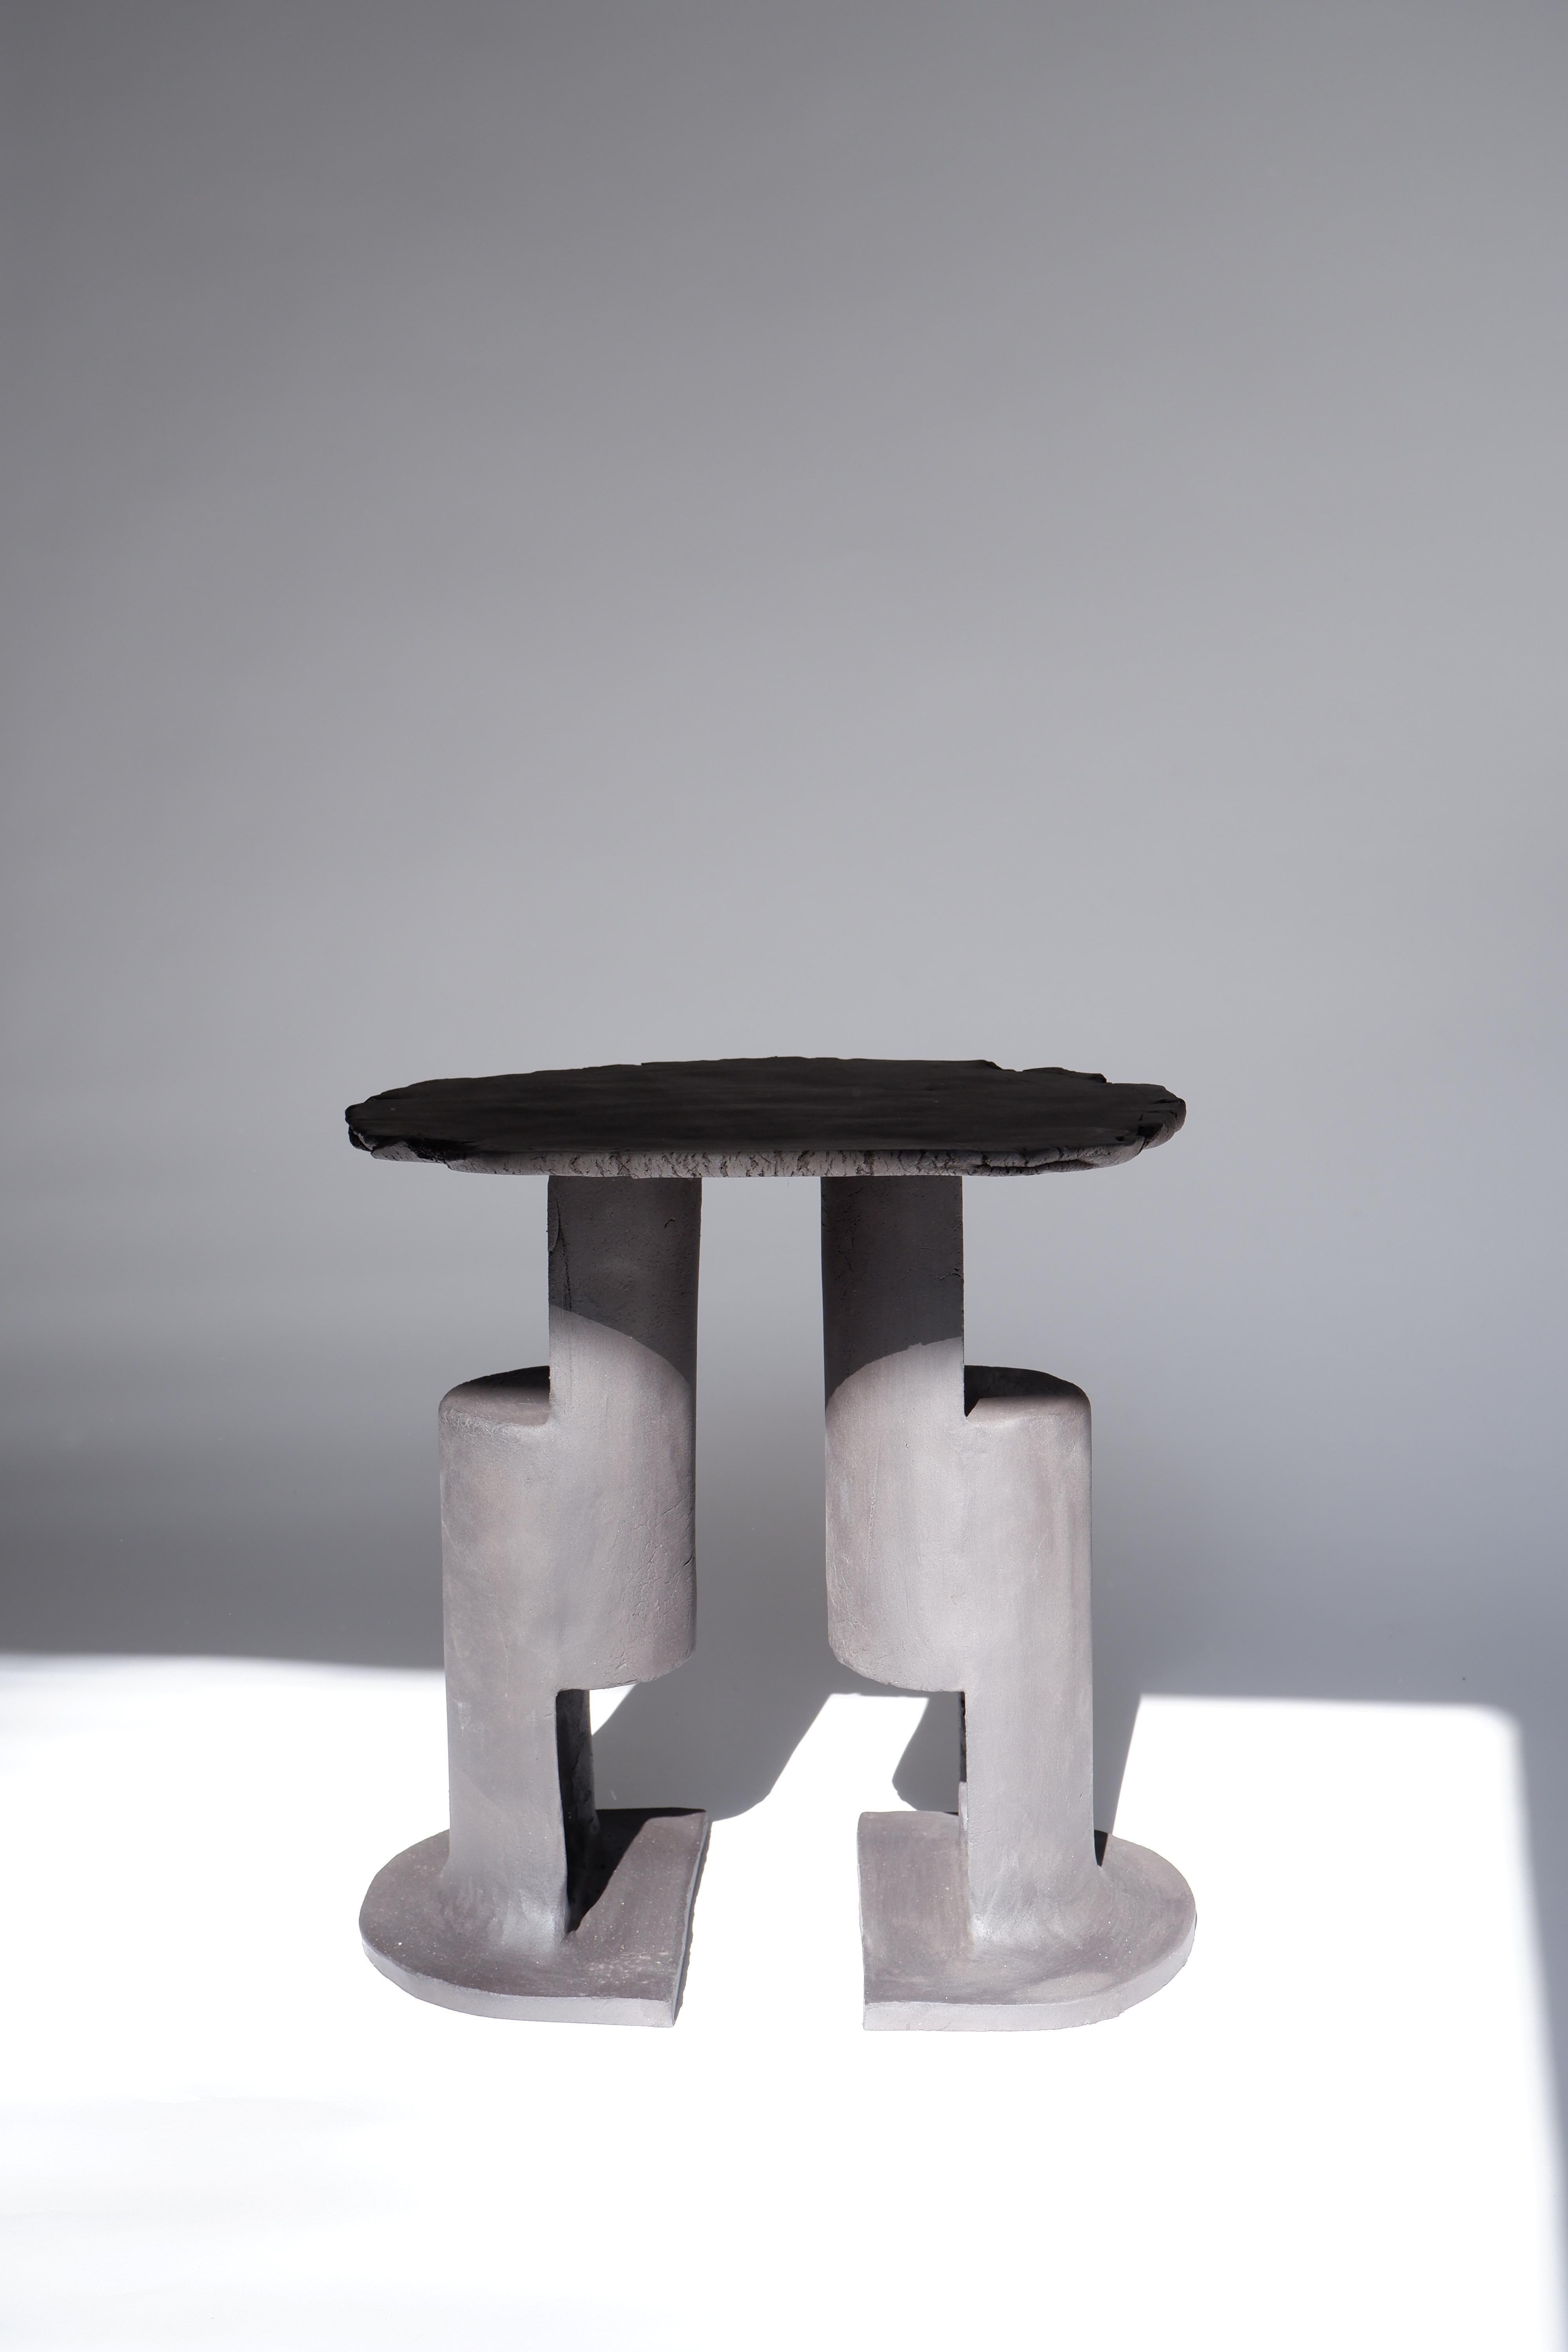 T01 Coffee Table by Ia Kutateladze
One Of  A Kind.
Dimensions: D 38 x H 37 cm.
Materials: Black clay.

Each piece is one of a kind, due to its free hand-building process. The top is always irregular and one of a kind. Possible material variations: